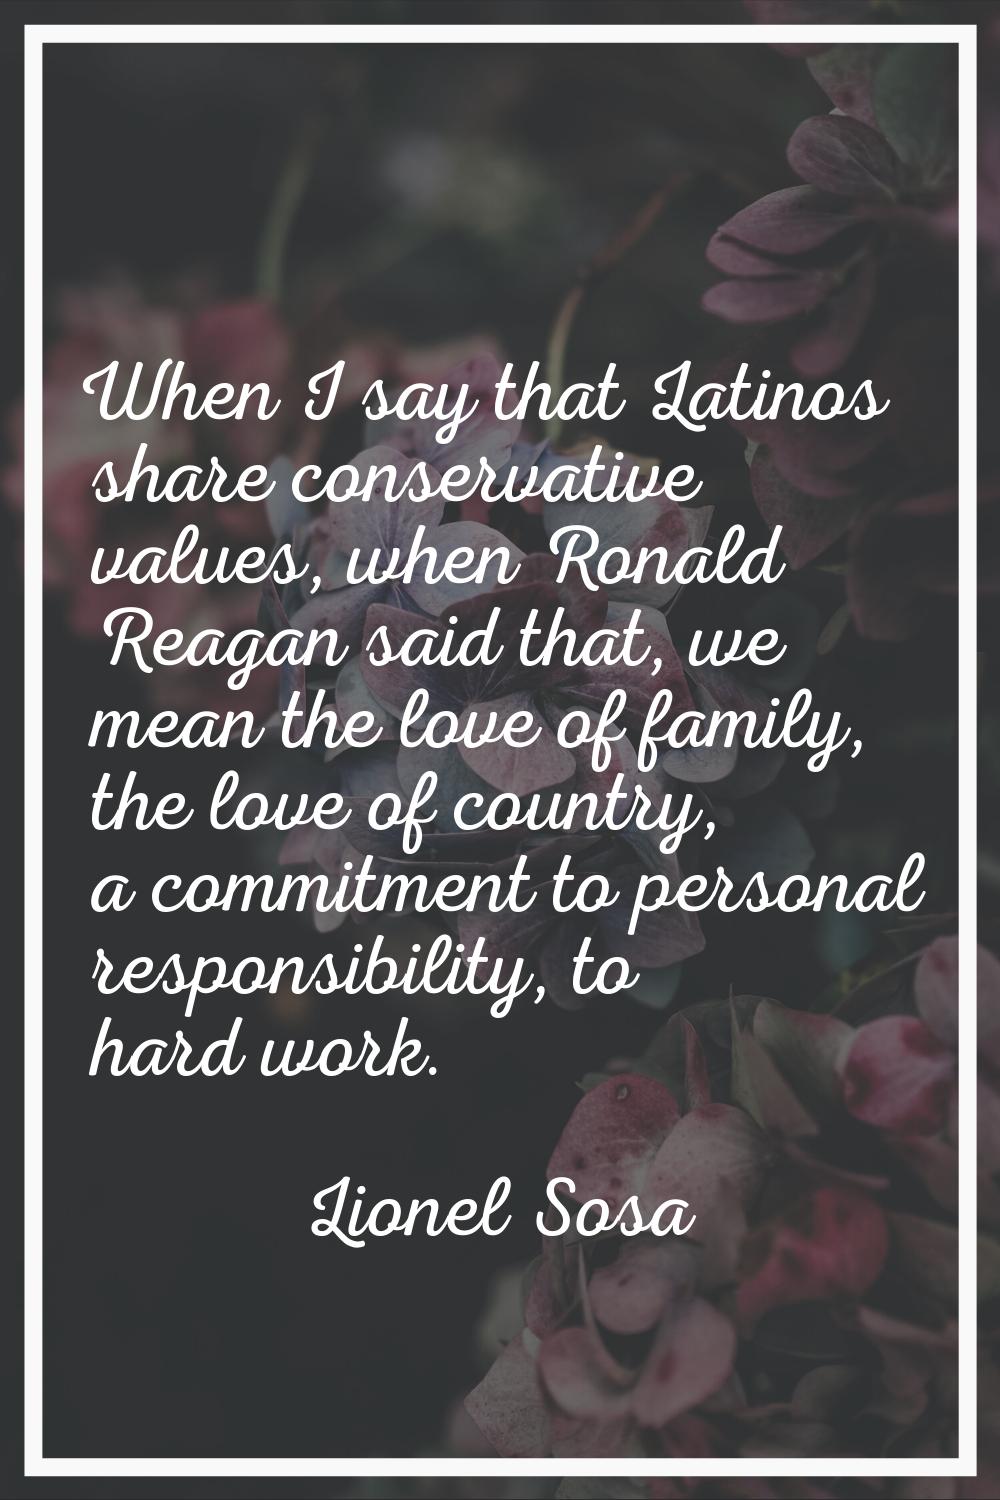 When I say that Latinos share conservative values, when Ronald Reagan said that, we mean the love o